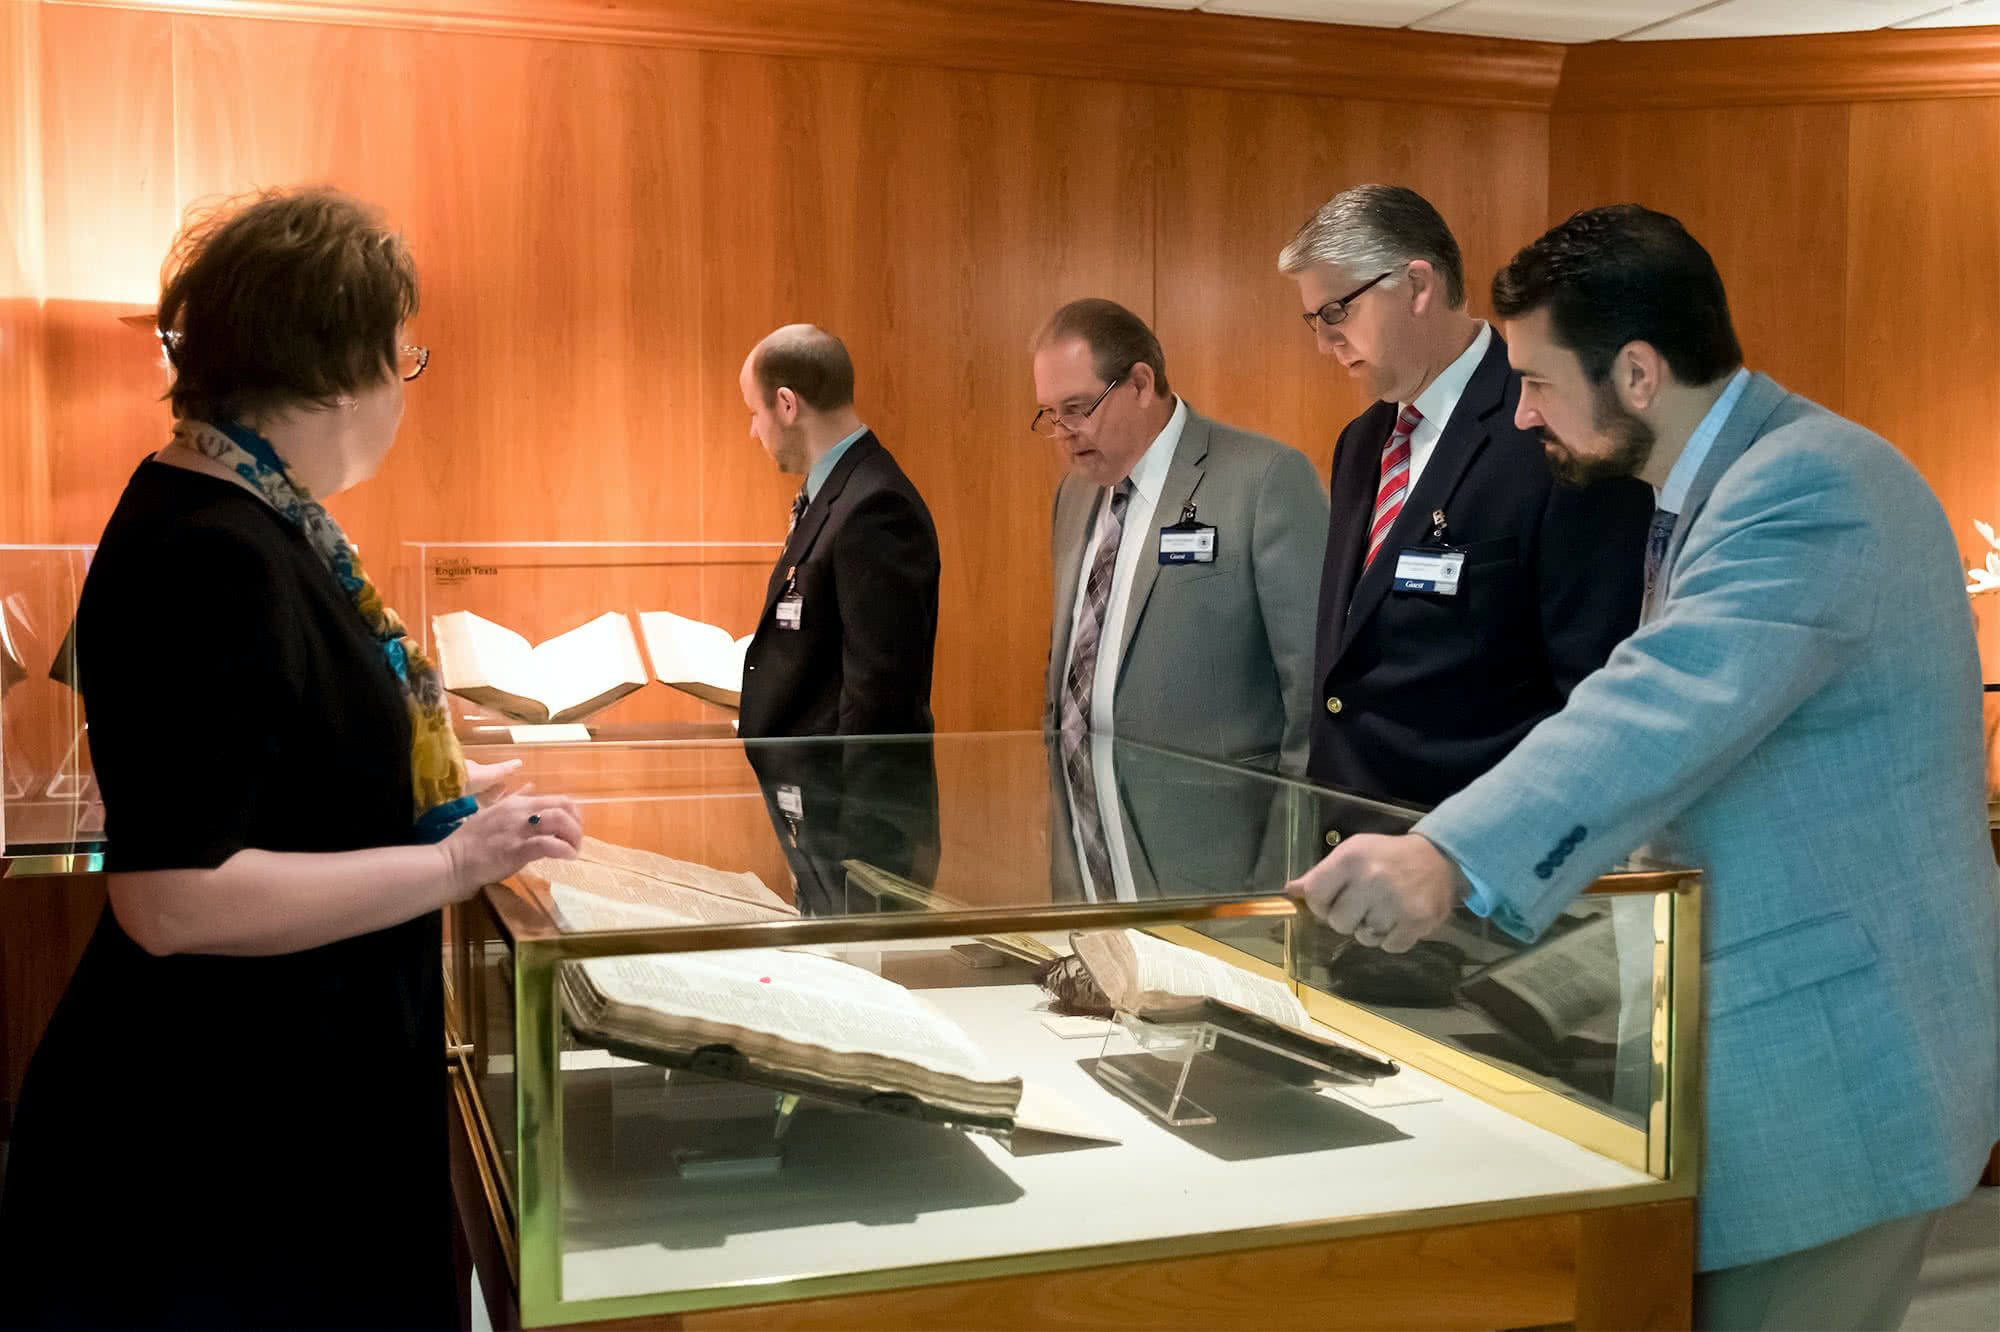 Group of people viewing artifacts